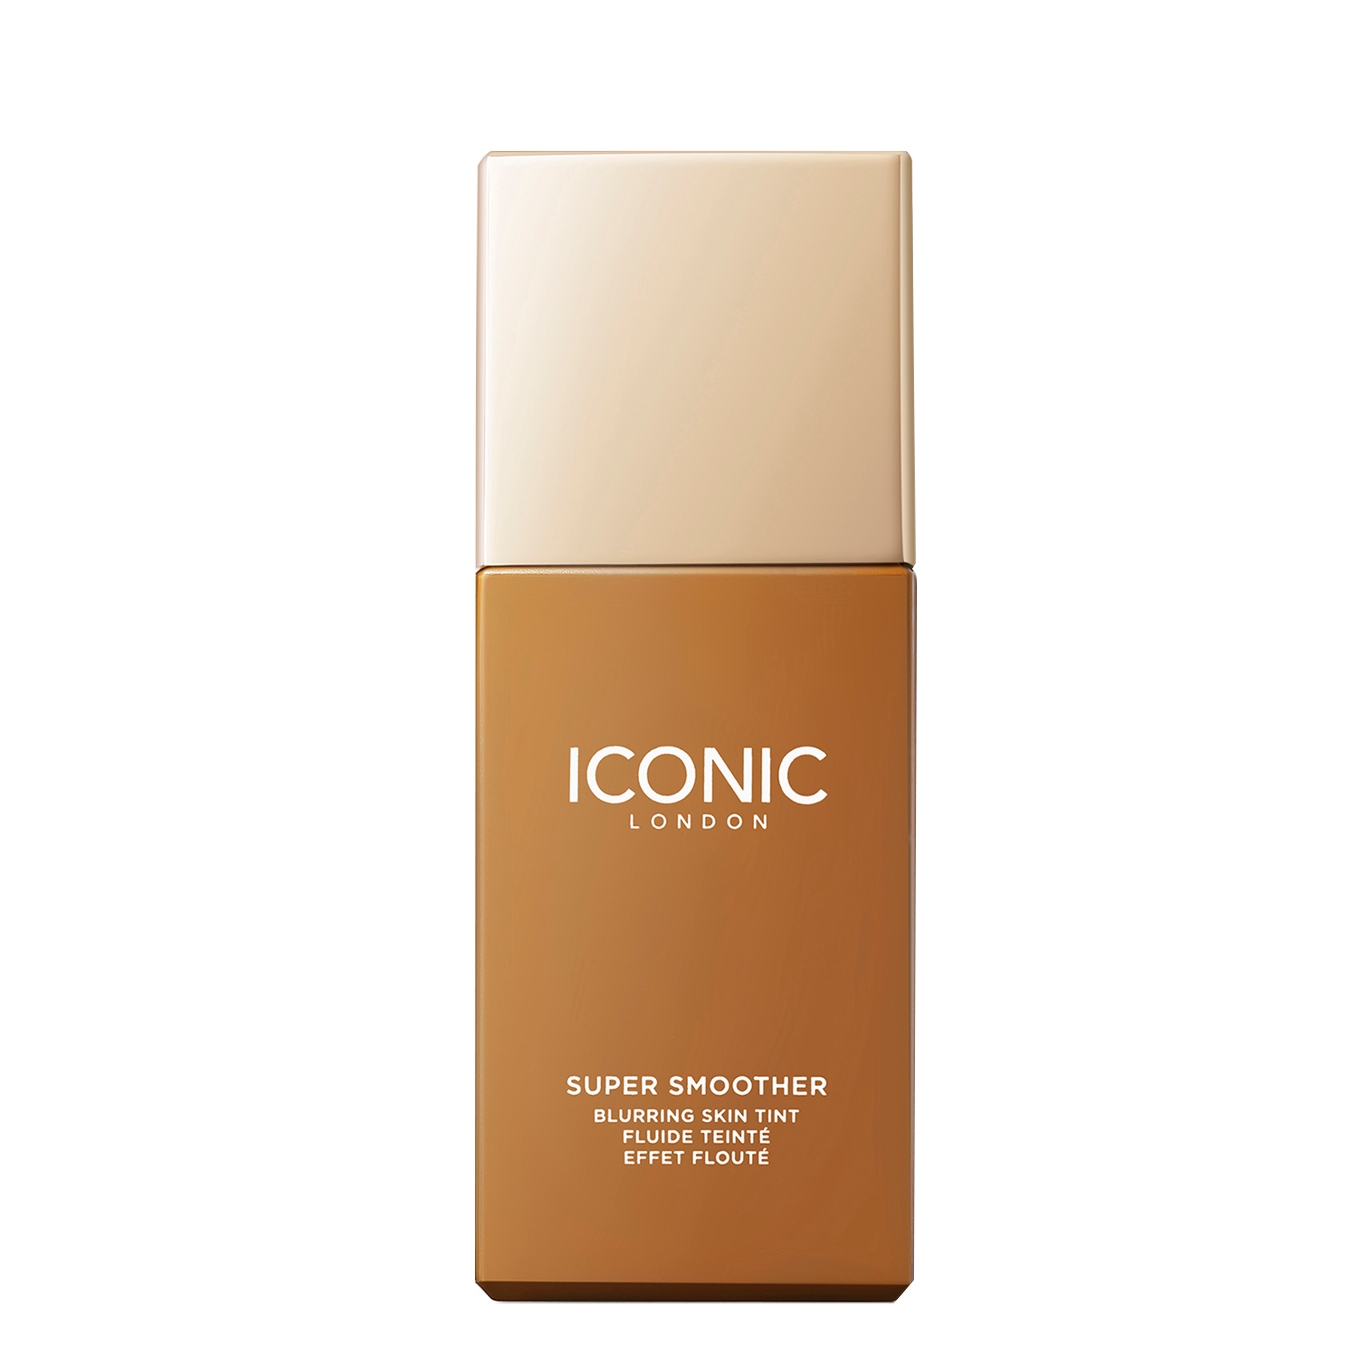 Iconic London Super Smoother Blurring Skin Tint - Colour Golden Deep